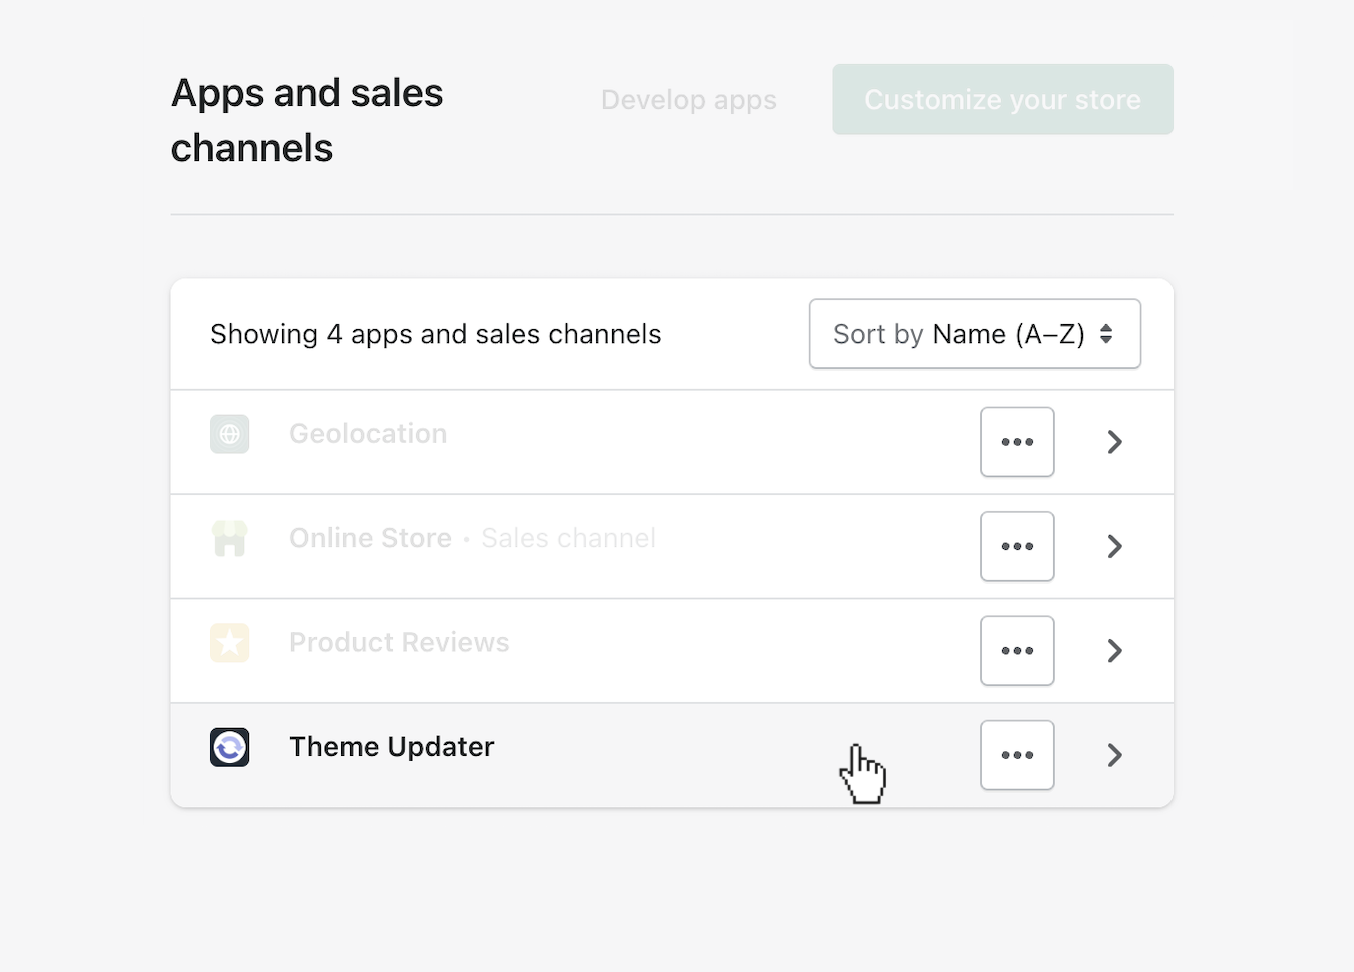 open_theme_updater_in_the_apps_and_sales_channels_.png